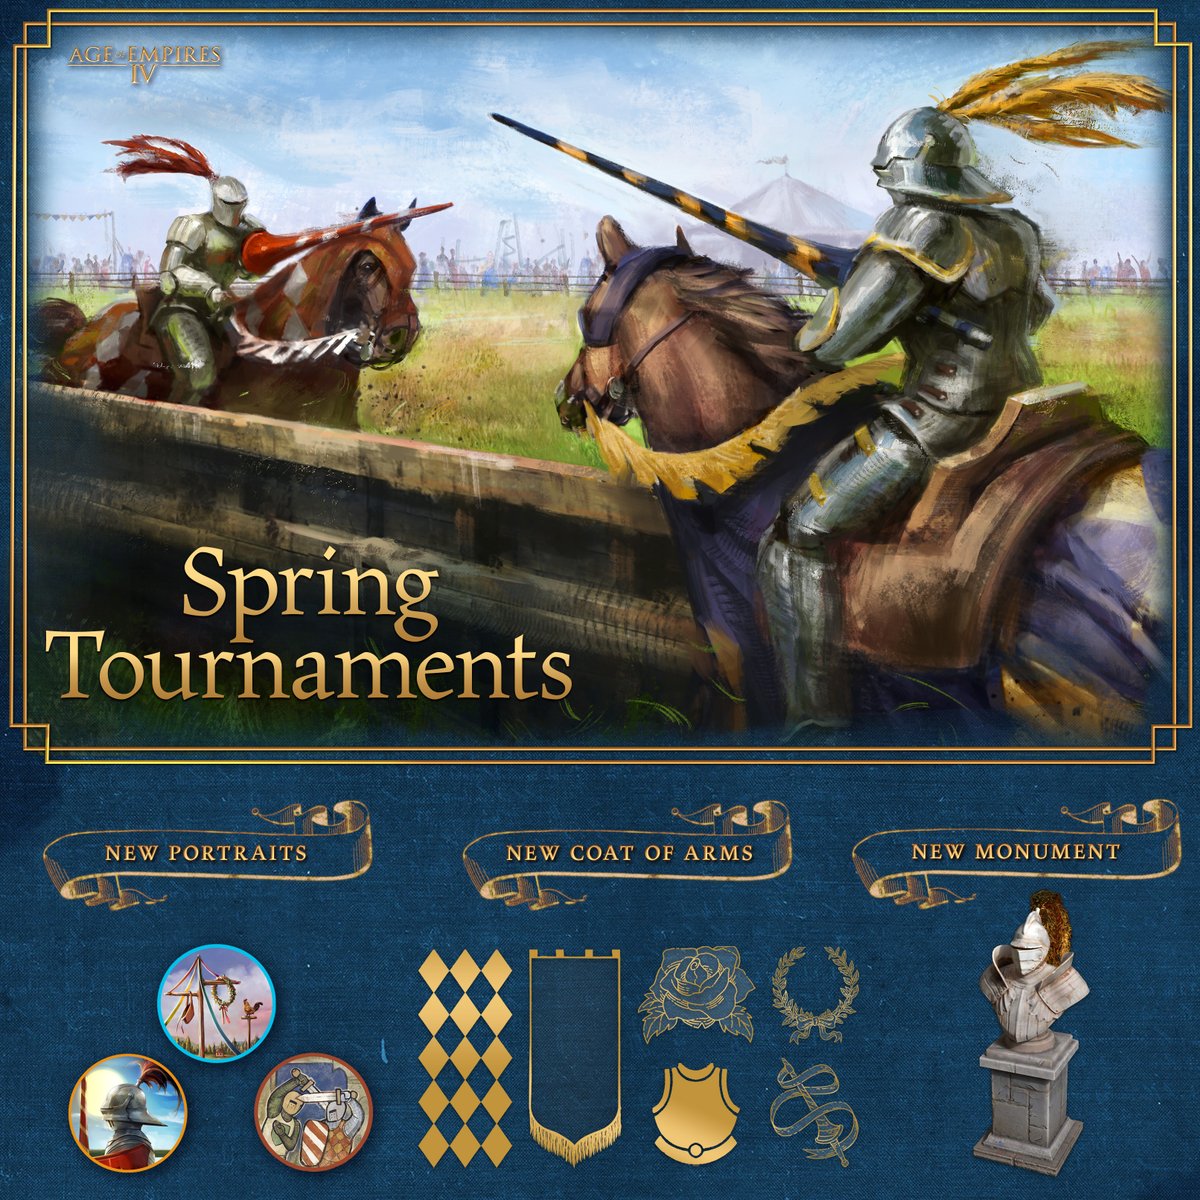 Celebrate the changing of the seasons with the Spring Tournaments Event! From now until June 18th, you can unlock new portraits, Coats of Arms, banner customizations, and a monument in #AgeofEmpiresIV.